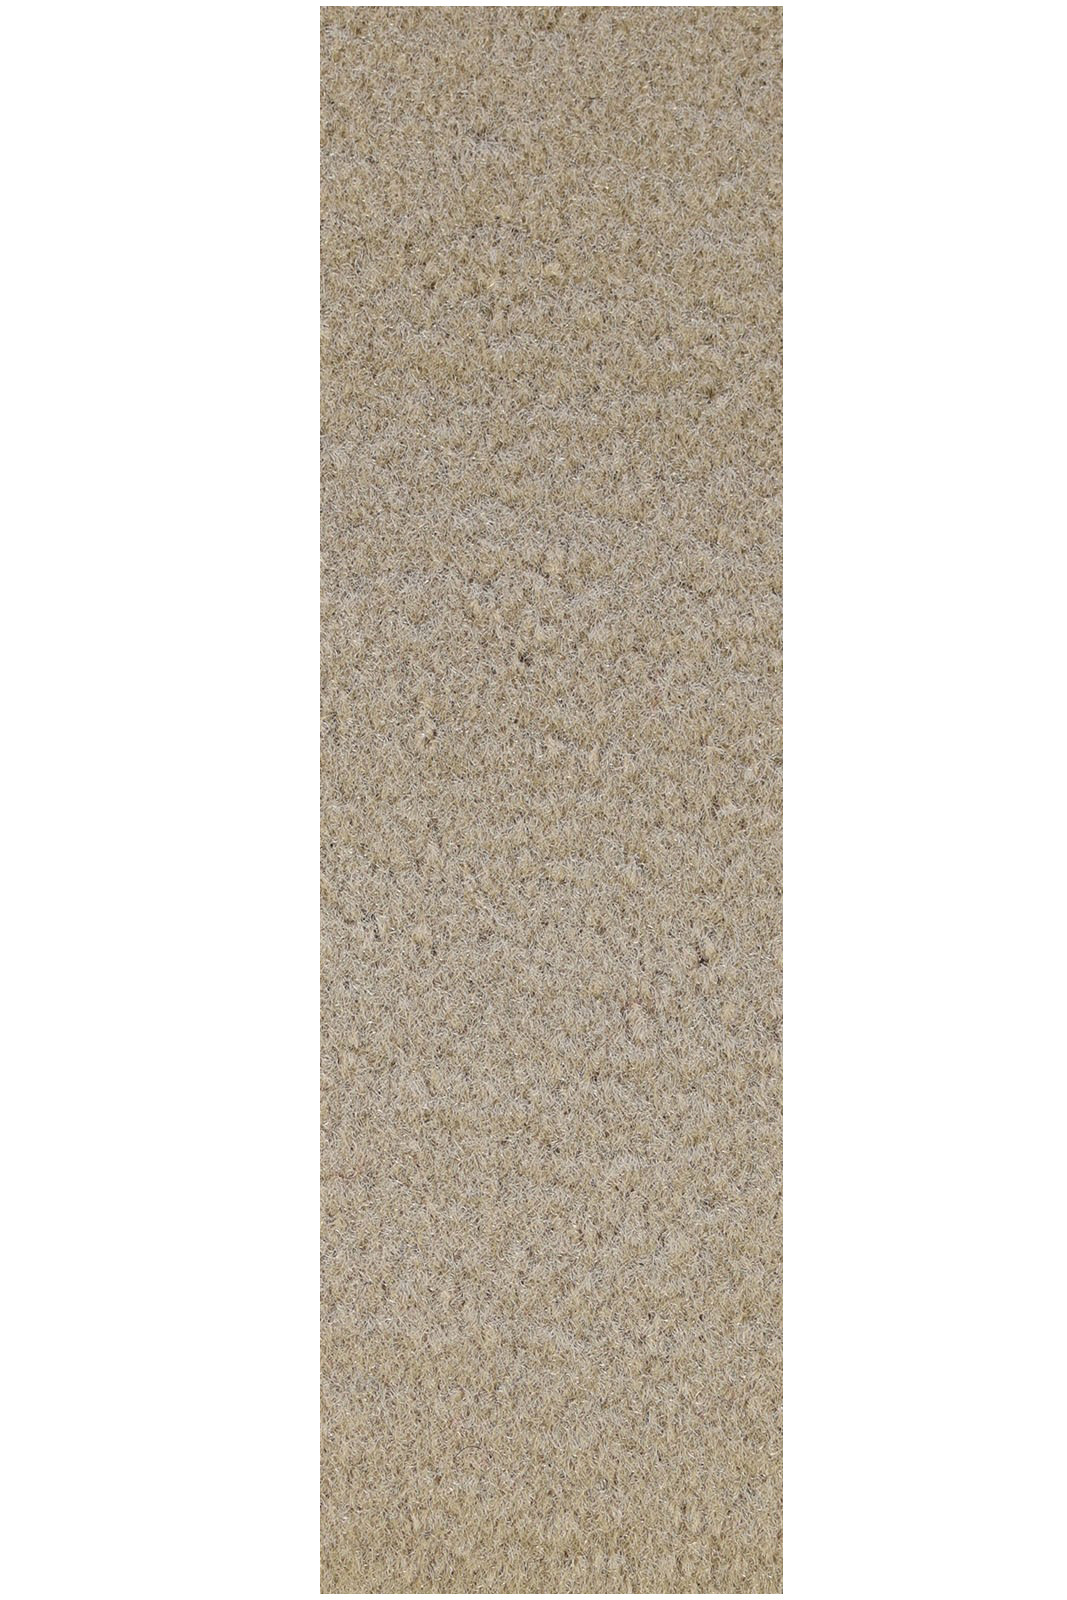 Commercial Indoor/Outdoor Beige Custom Size Runner 2' x 48' - Area Rug with Rubber Marine Backing for Patio, Porch, Deck, Boat, Basement or Garage with Premium Bound Polyester Edges - image 1 of 1